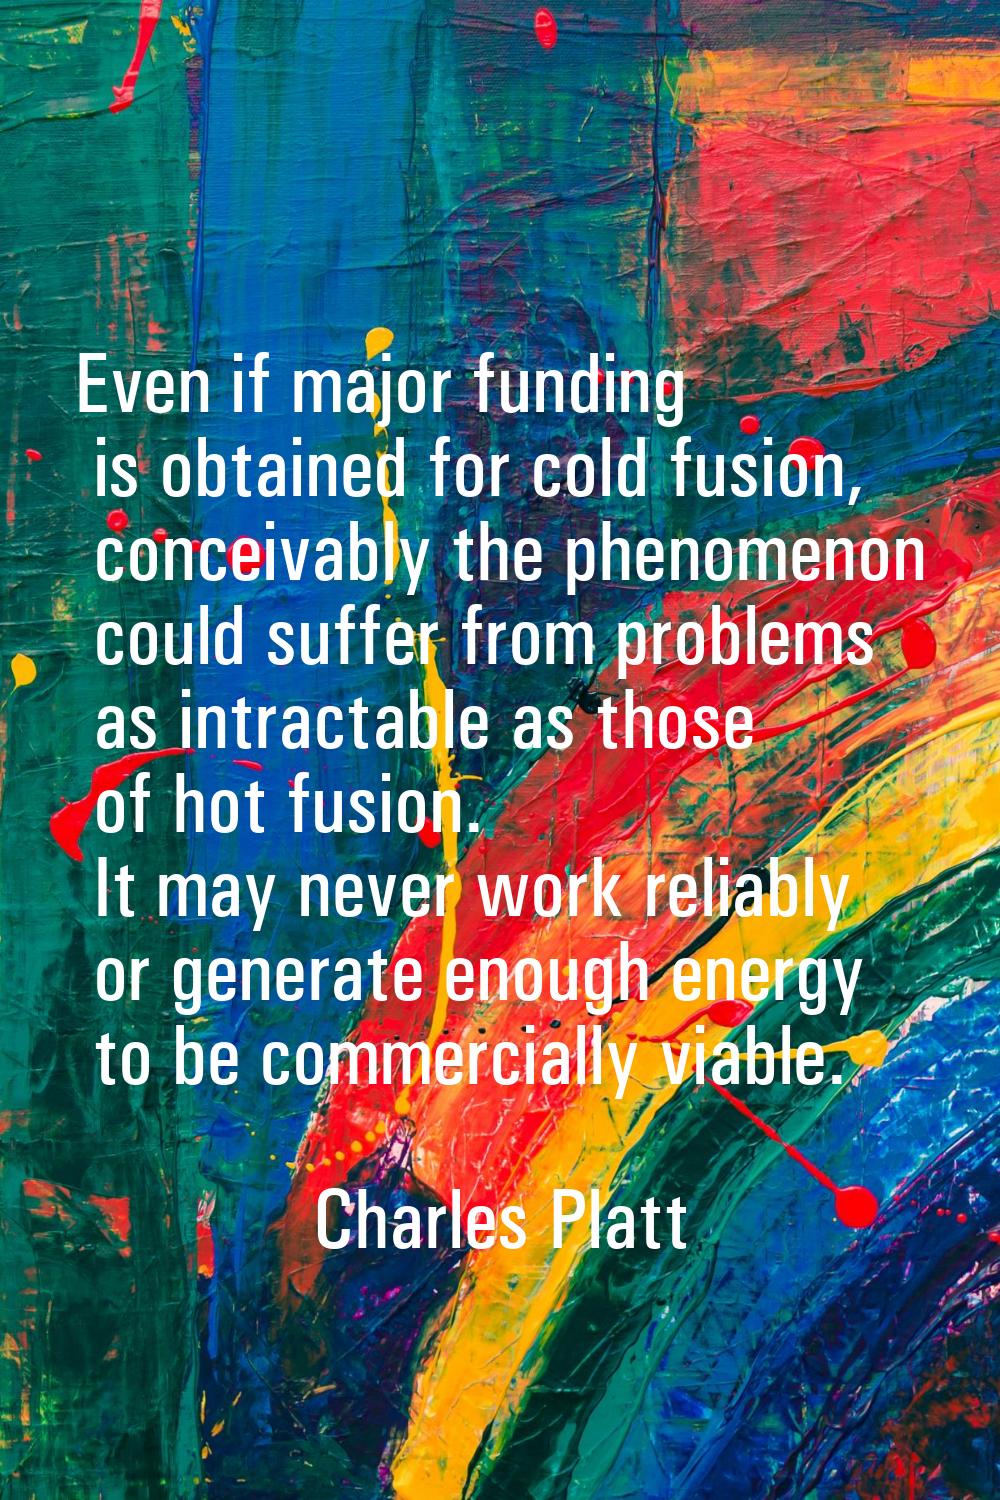 Even if major funding is obtained for cold fusion, conceivably the phenomenon could suffer from pro